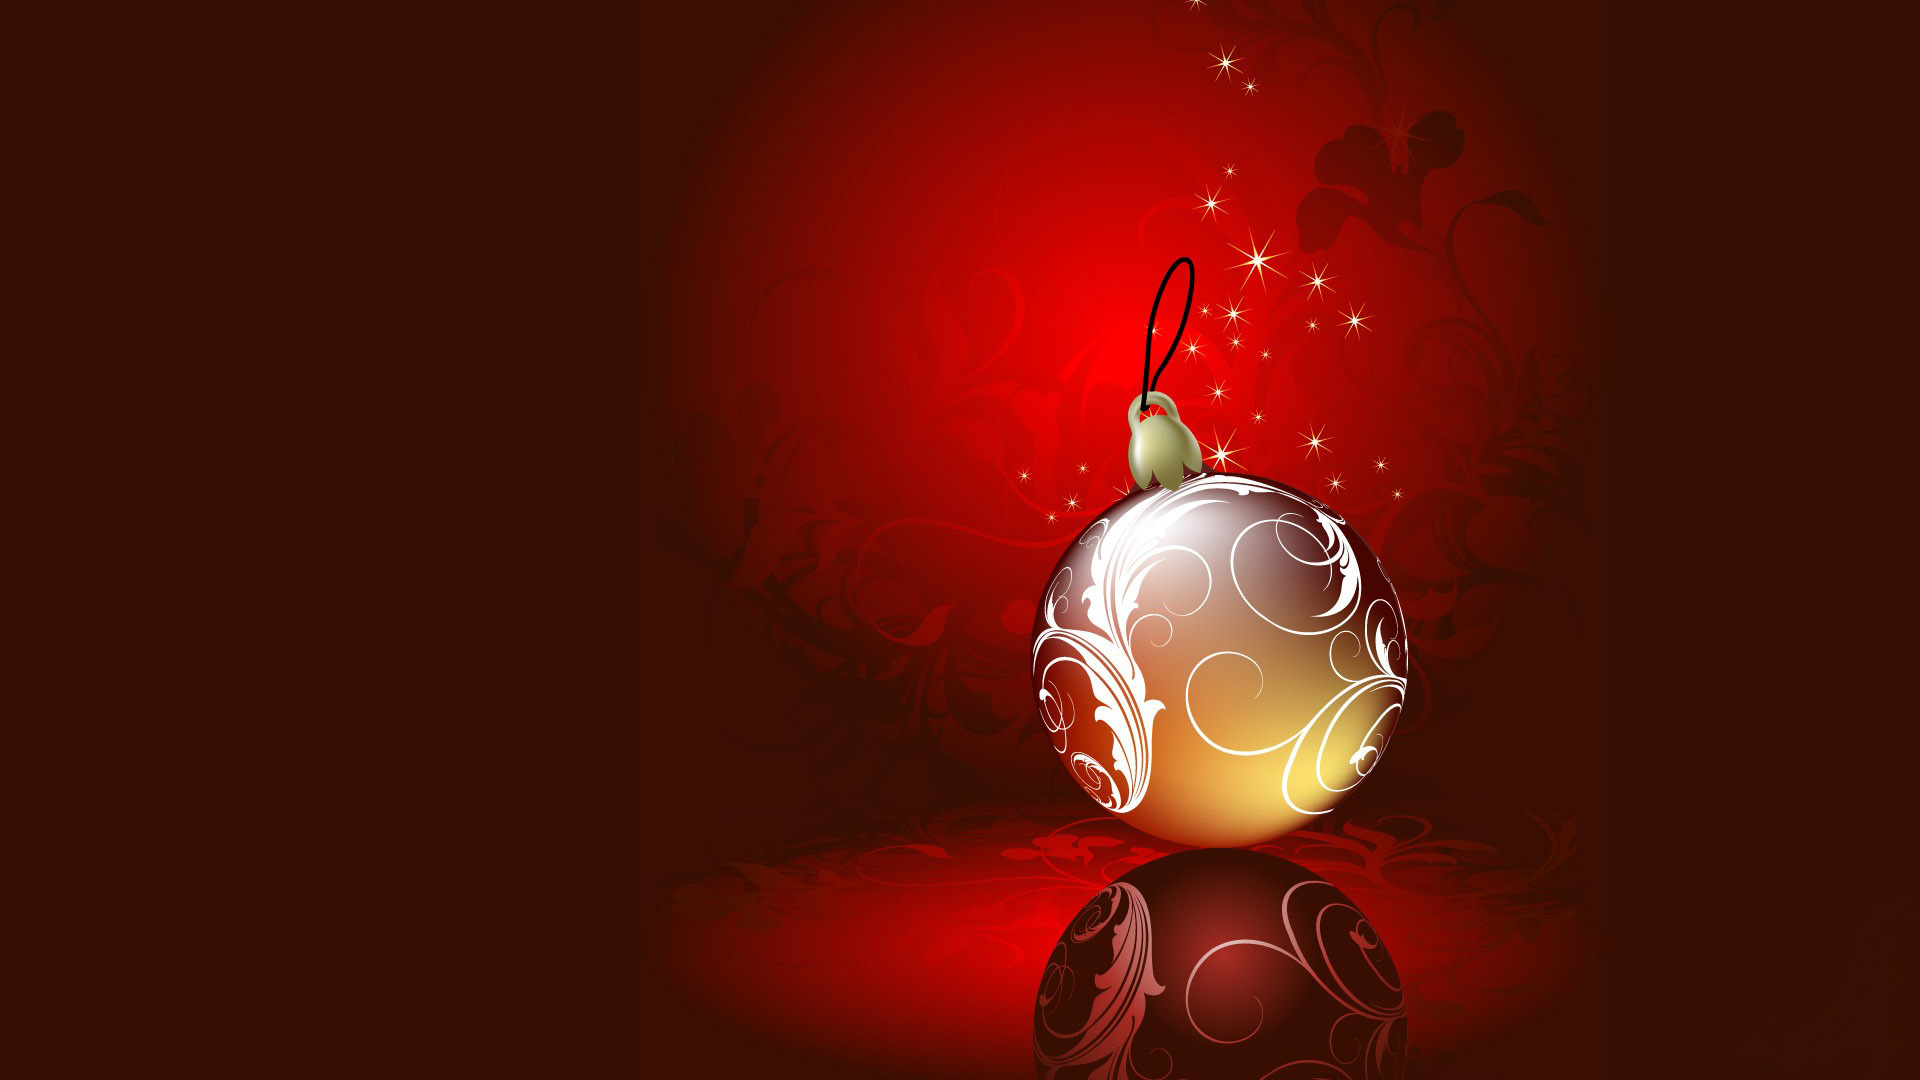 New Year Windows Background HD Wallpaper And Make This For